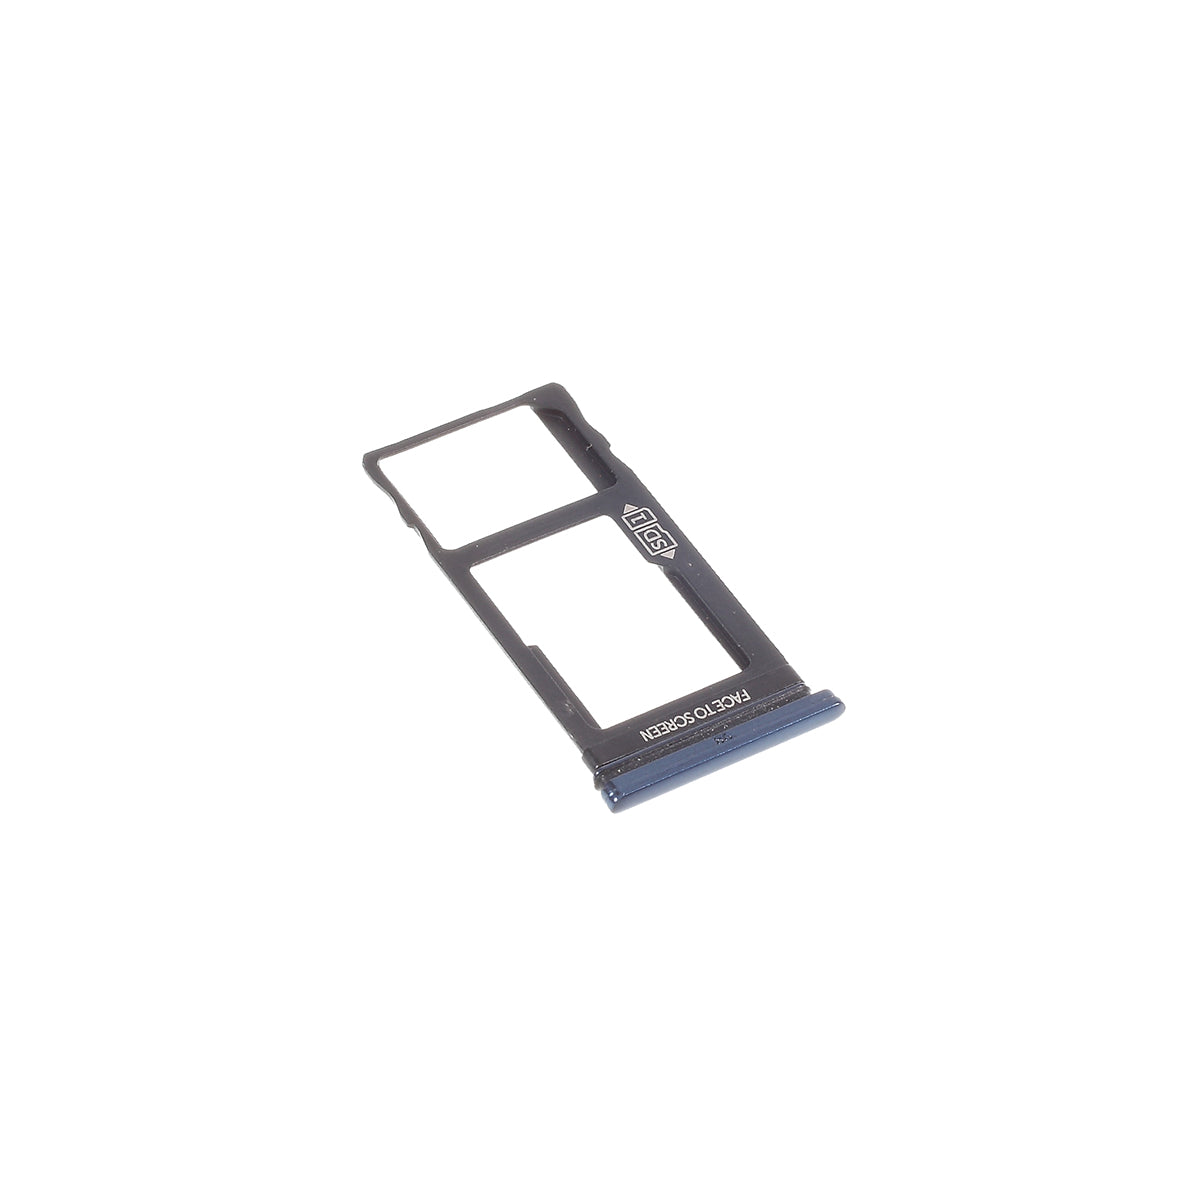 OEM Micro SD Card Tray Holder Replacement for Motorola One Vision P50 - Dark Blue